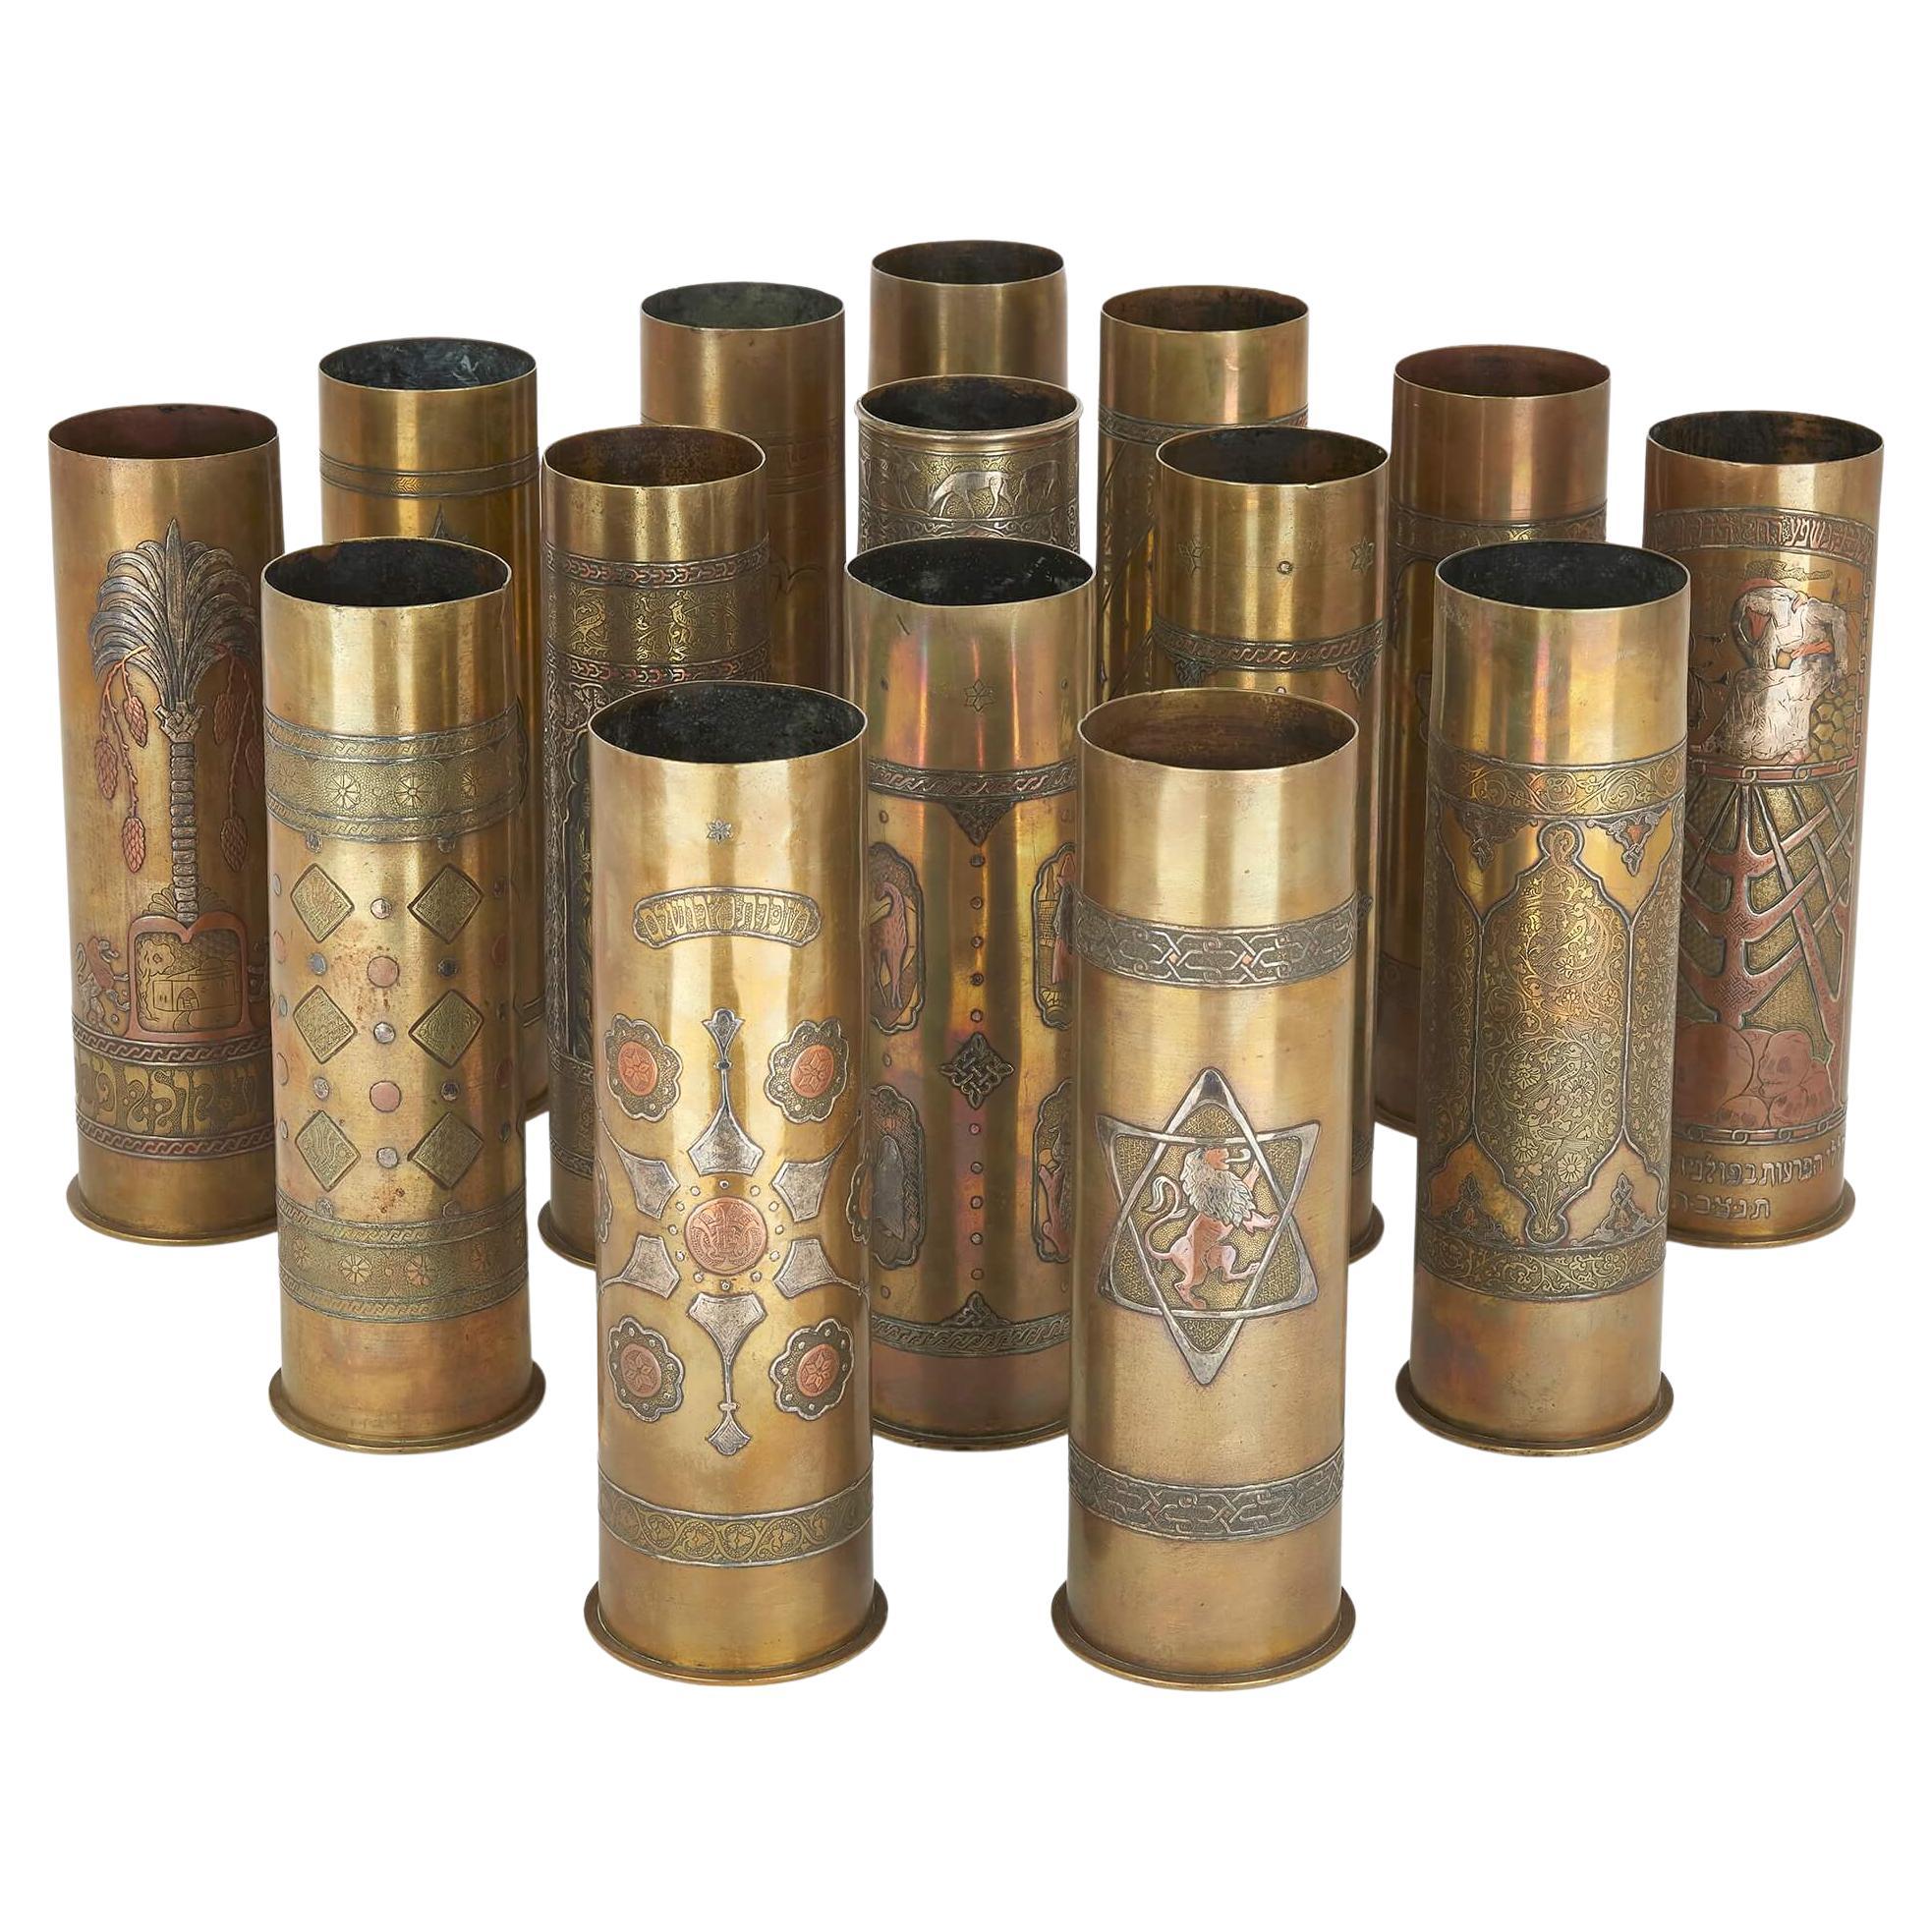 Set of 15 Bezalel Academy Judaica Silver and Brass Decorated WWI Shell Cases